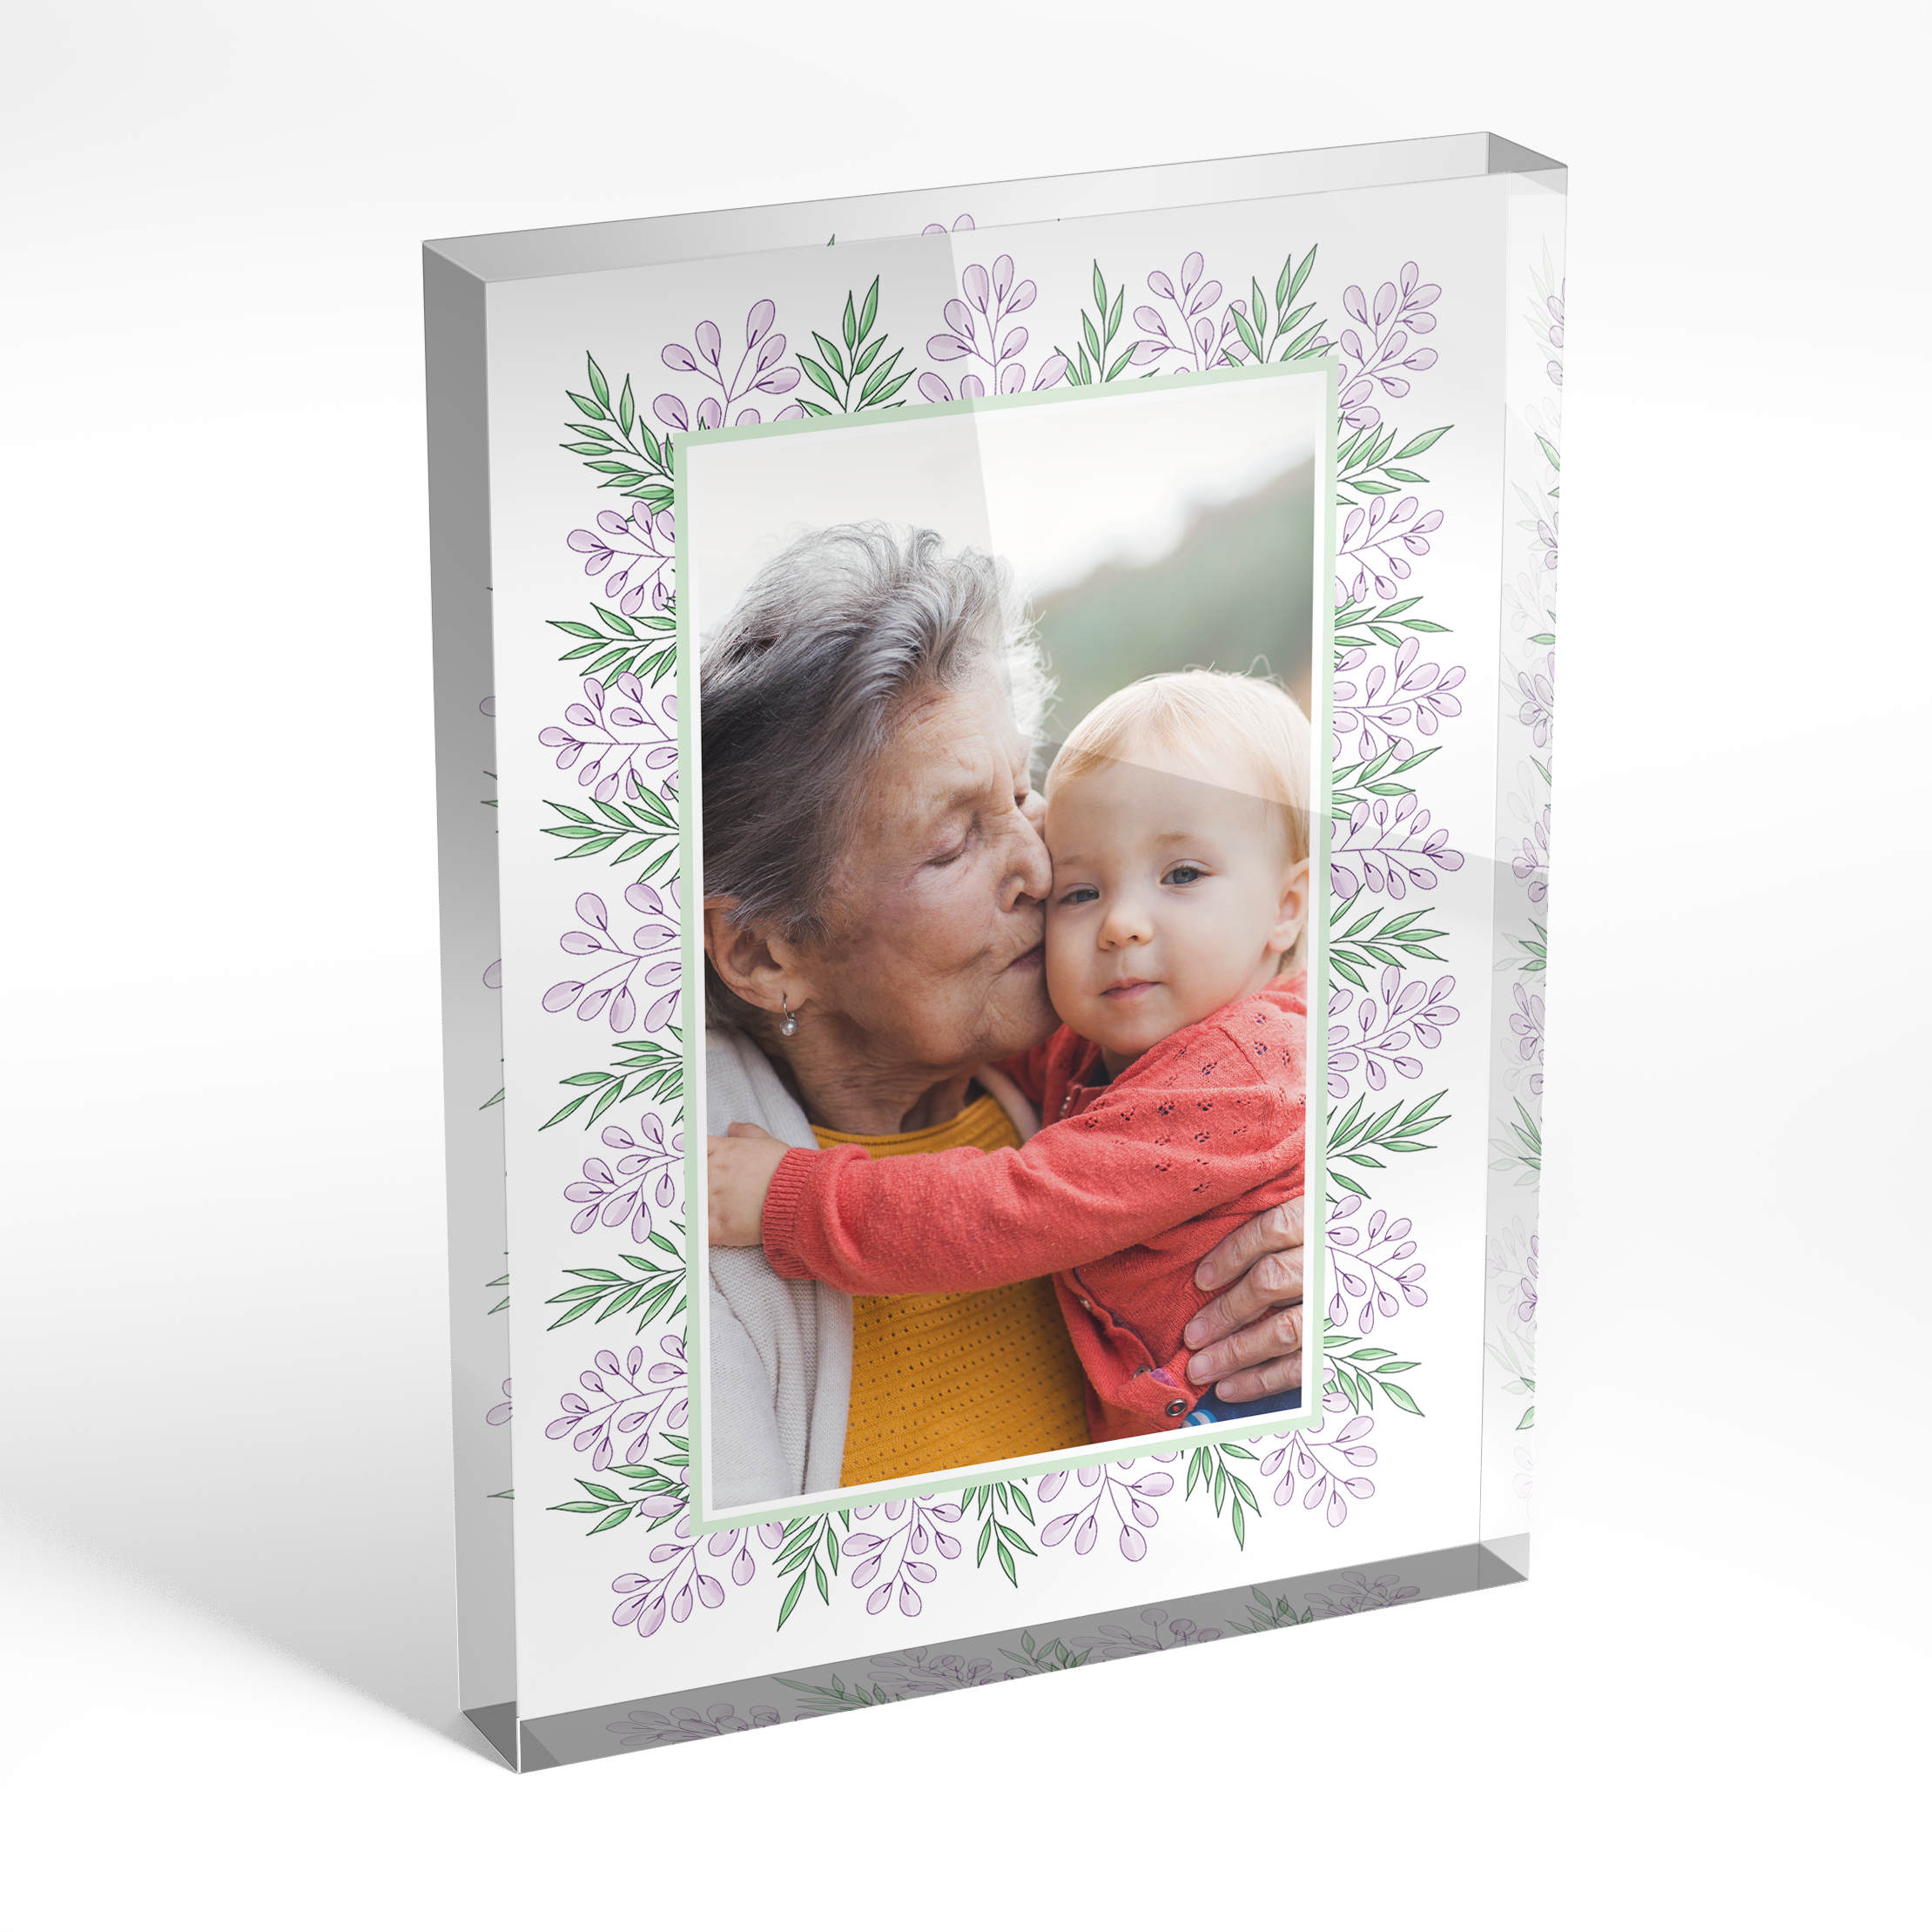 An angled side view of a portrait layout Acrylic Photo Block with space for 1 photo. Thiis design is named "Floral Memories". 